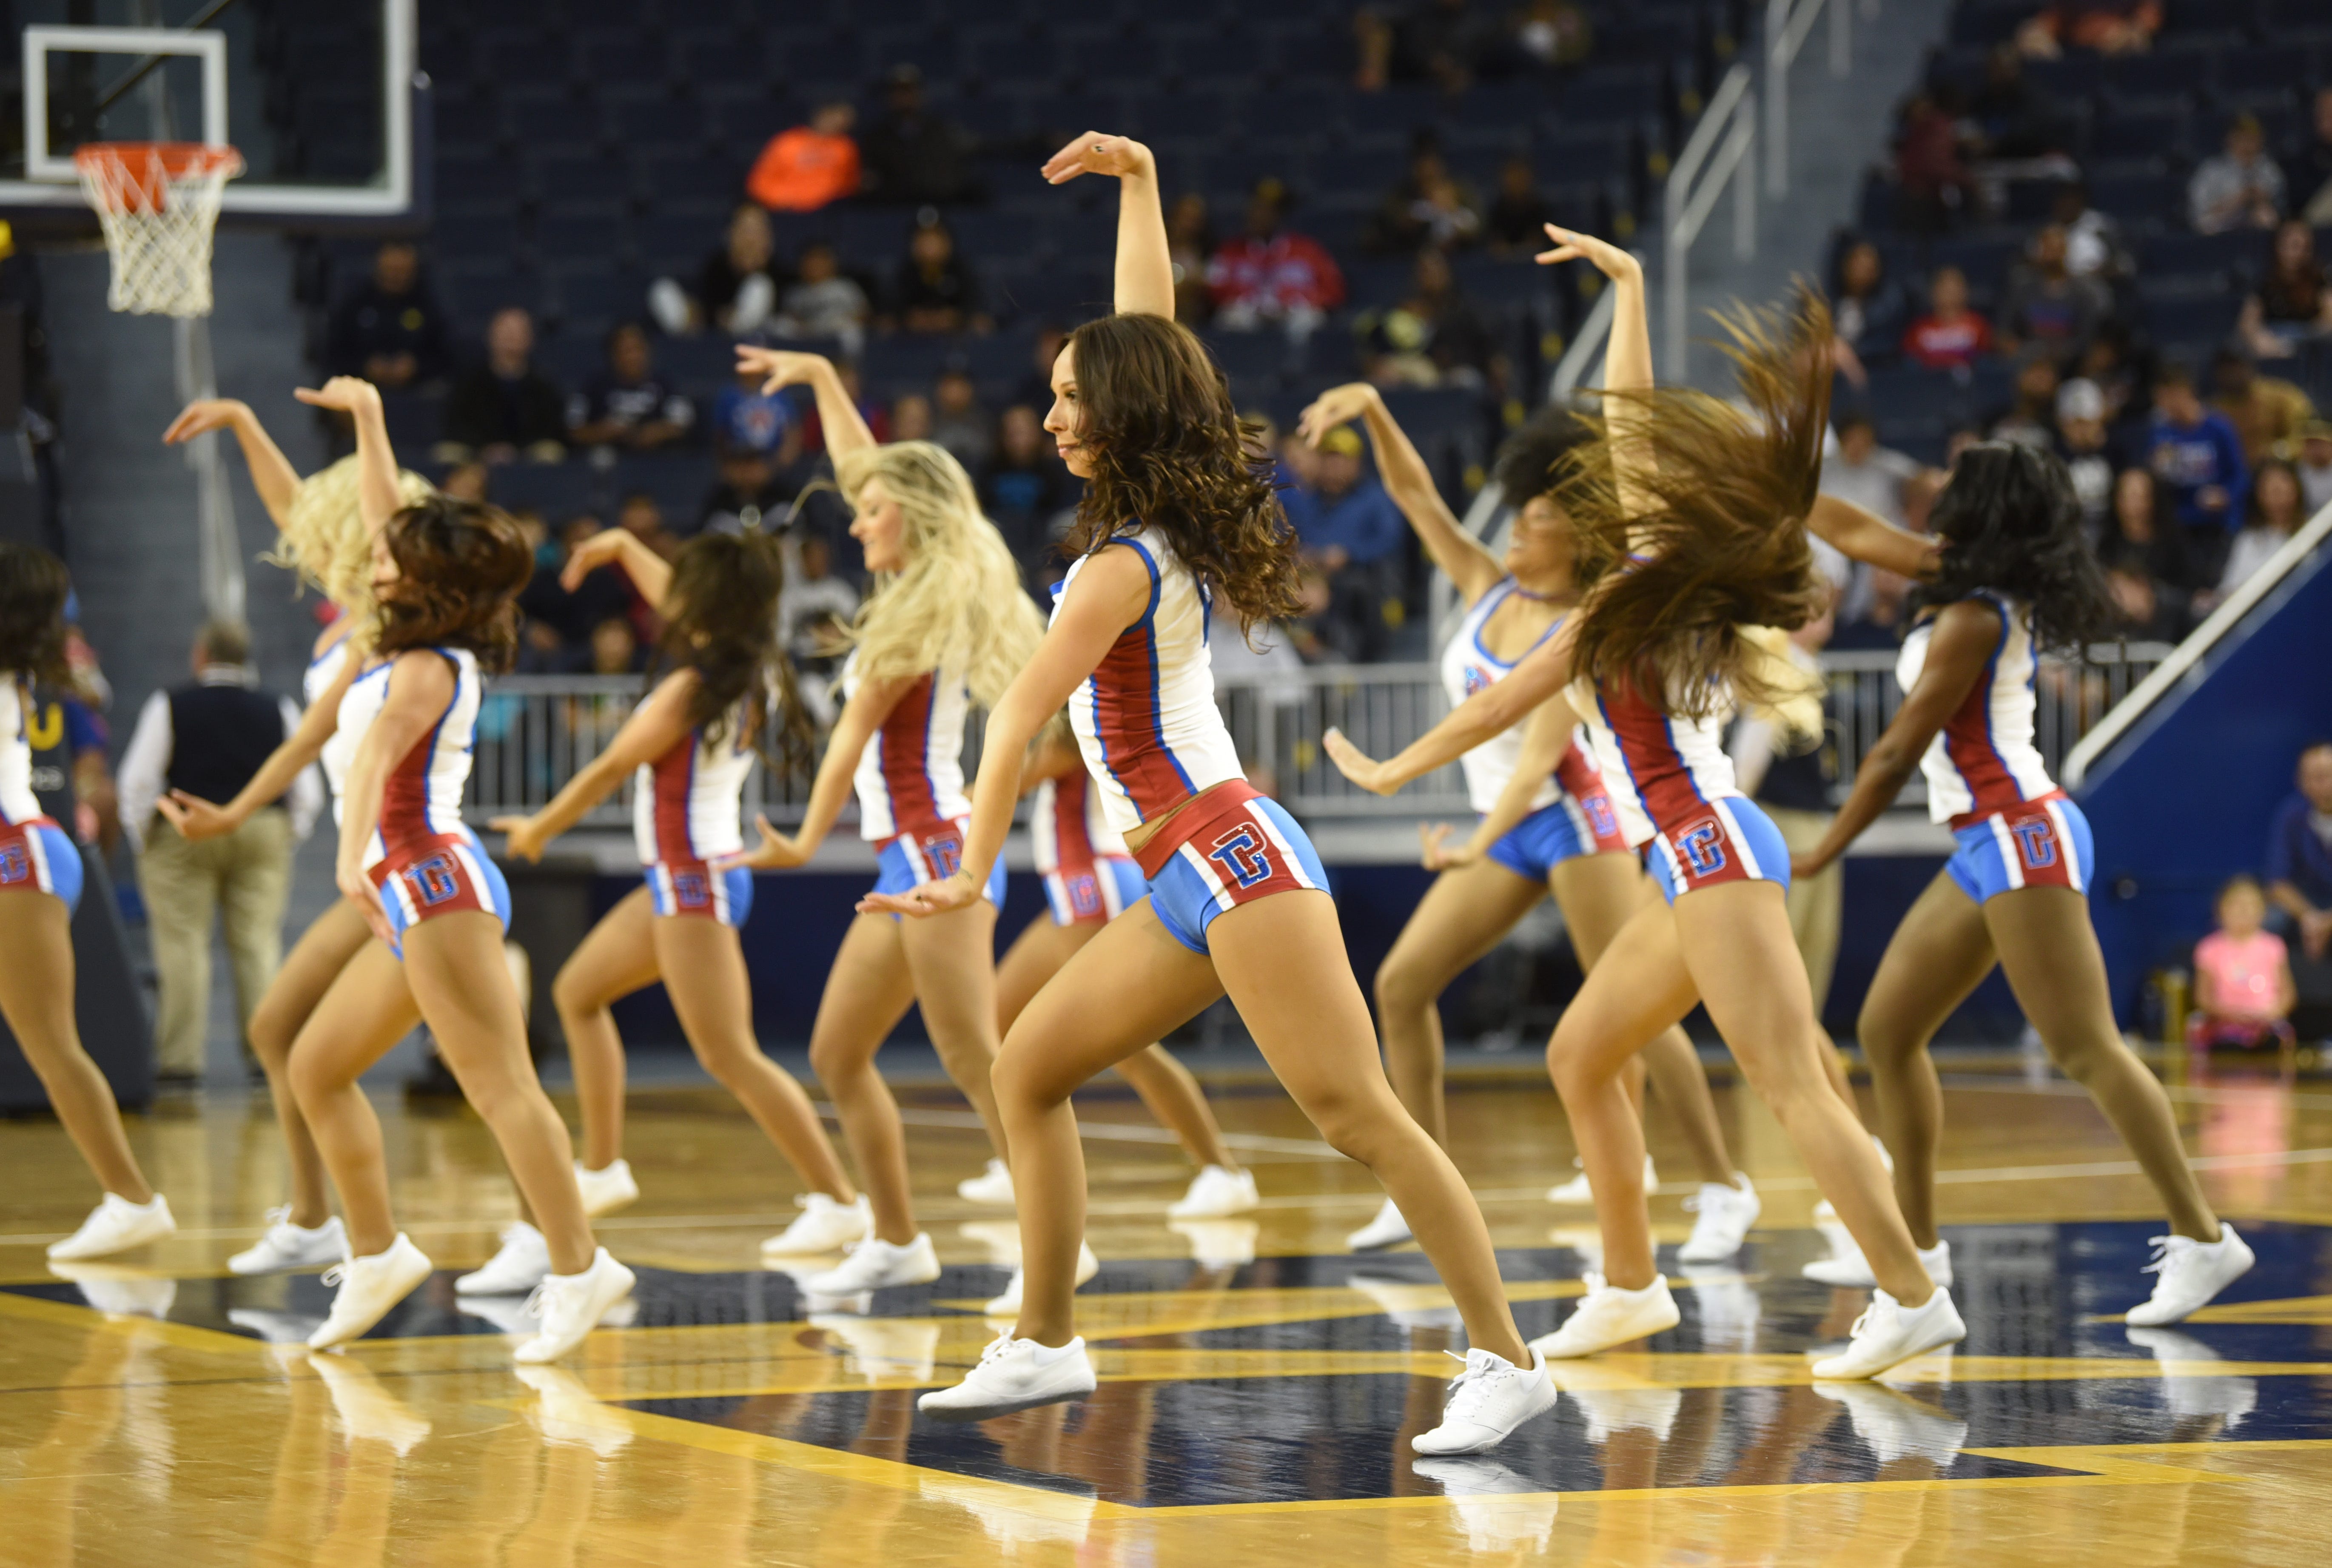 The Detroit Pistons cheerleaders perform during halftime.